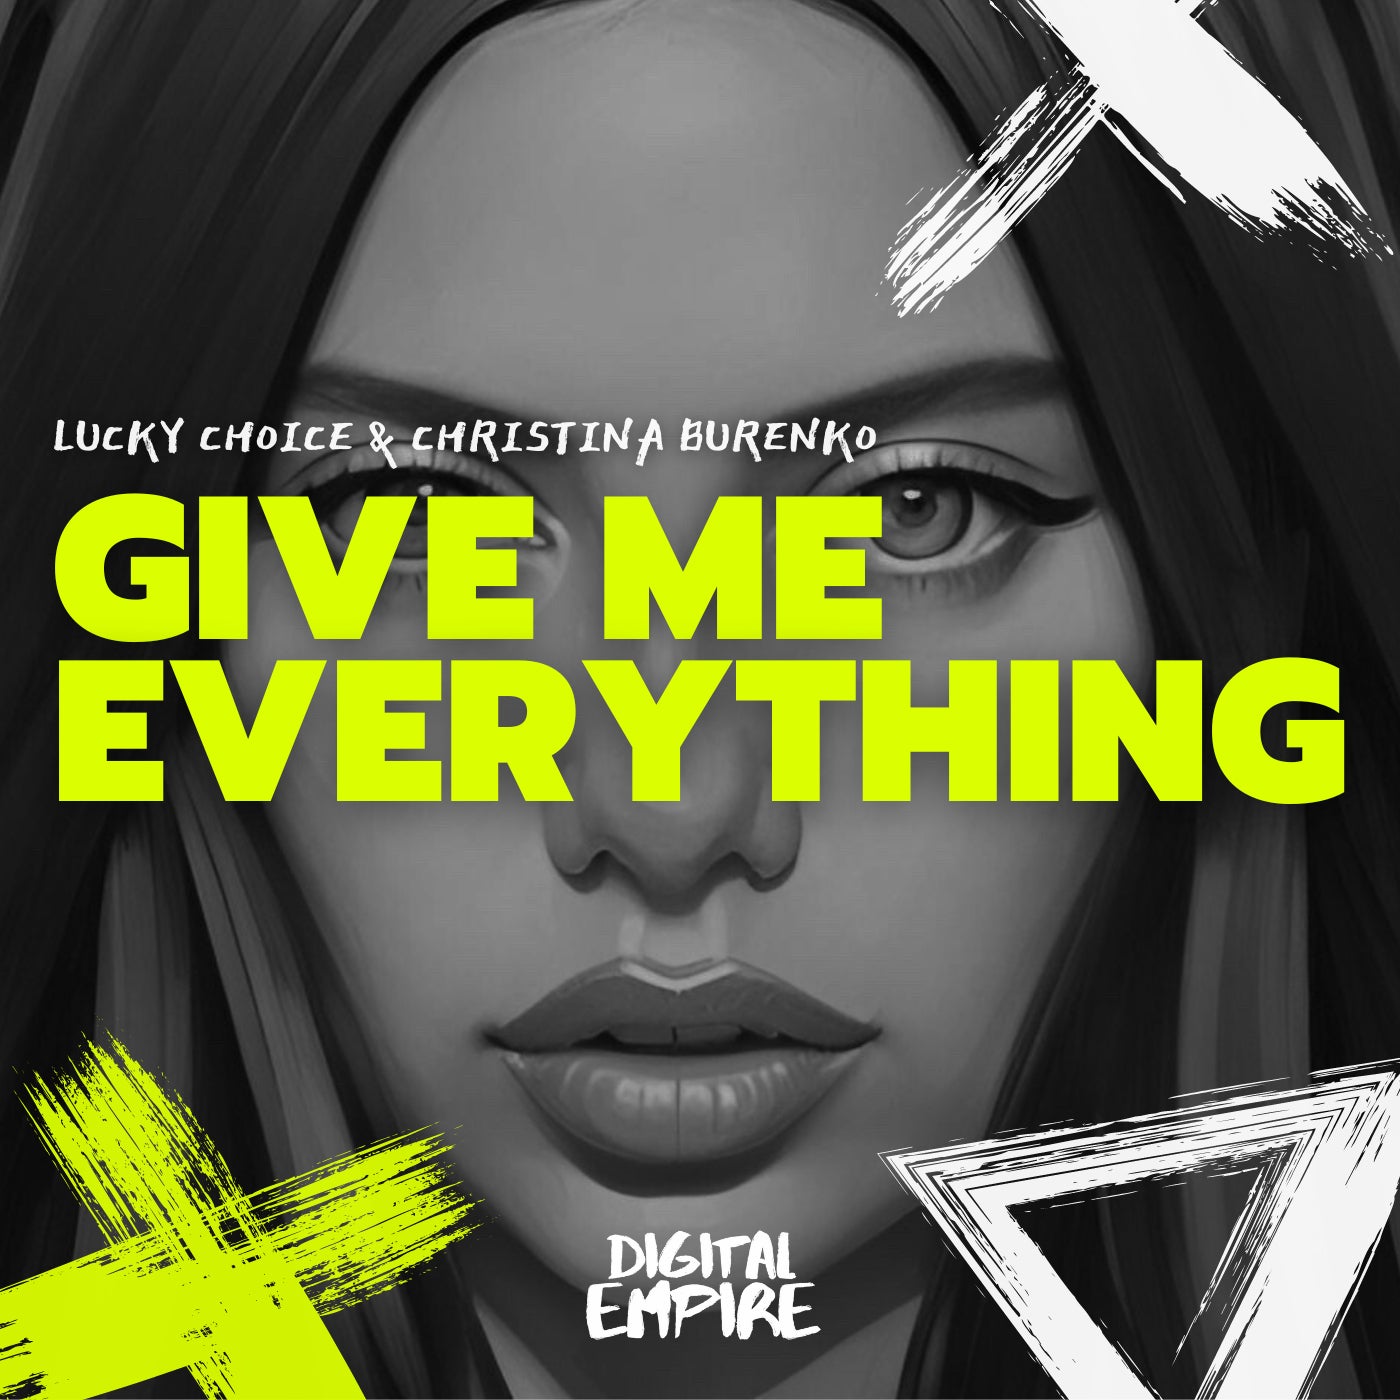 Give me everything